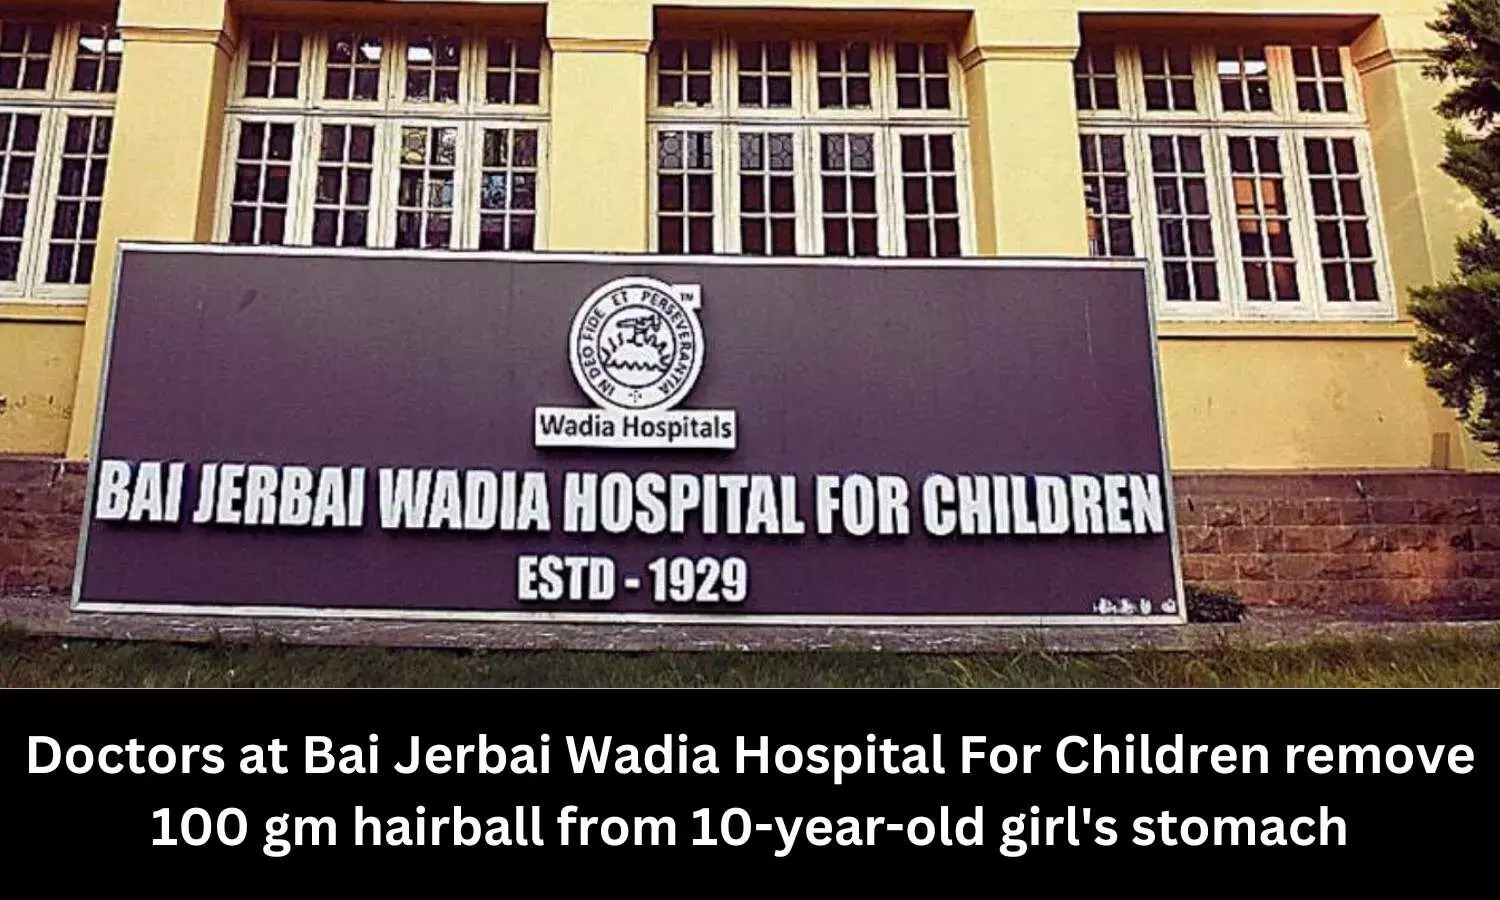 Doctors remove 100 gm hairball from stomach of minor girl